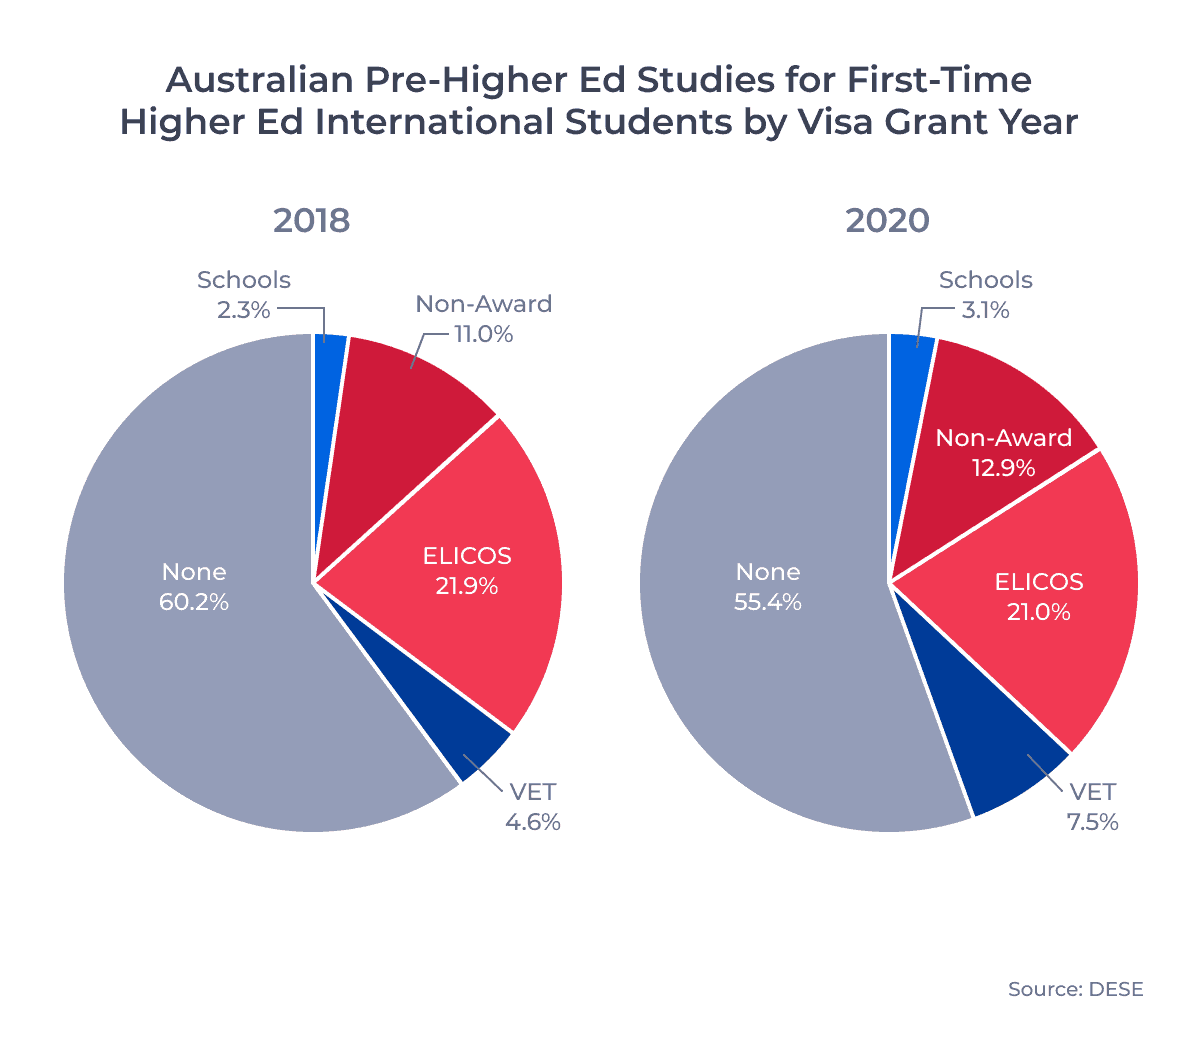 Australian Pre-Higher Ed Studies for First-Time Higher Ed International Students by Visa Grant Year